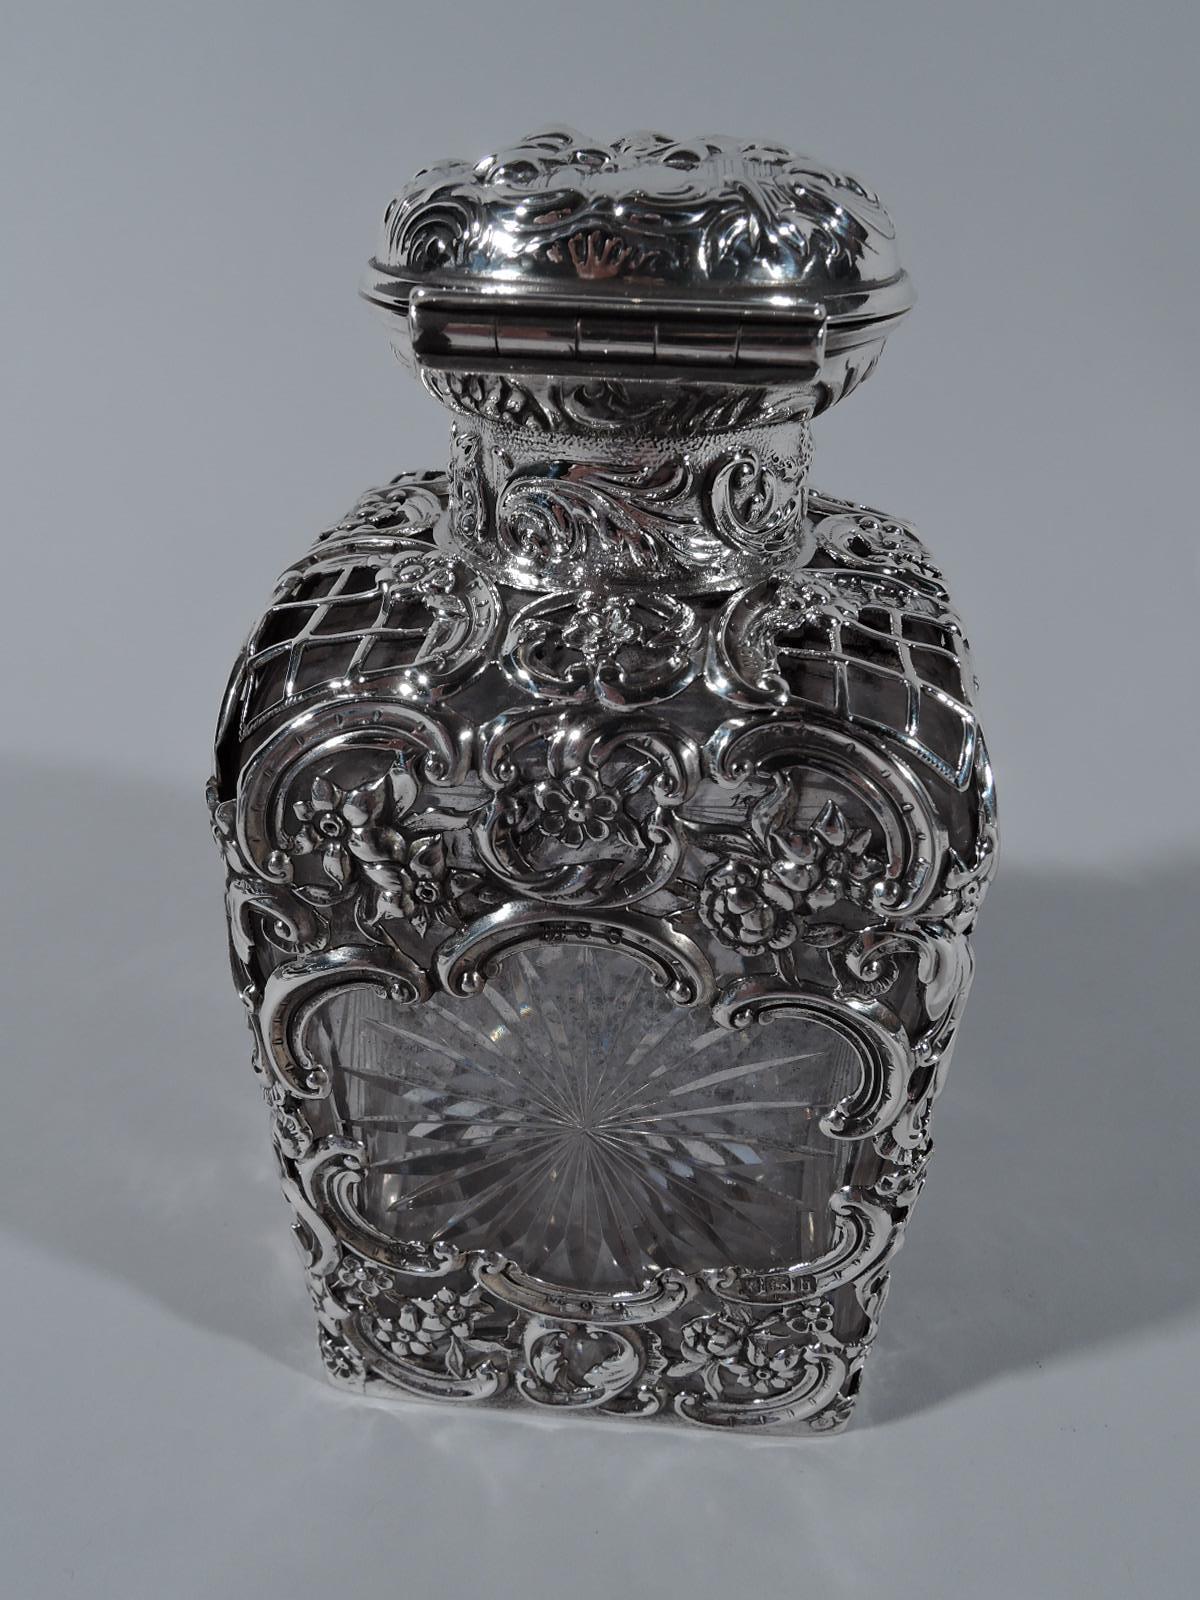 Rococo Revival Antique English Sterling Silver and Cut-Glass Perfume by Comyns